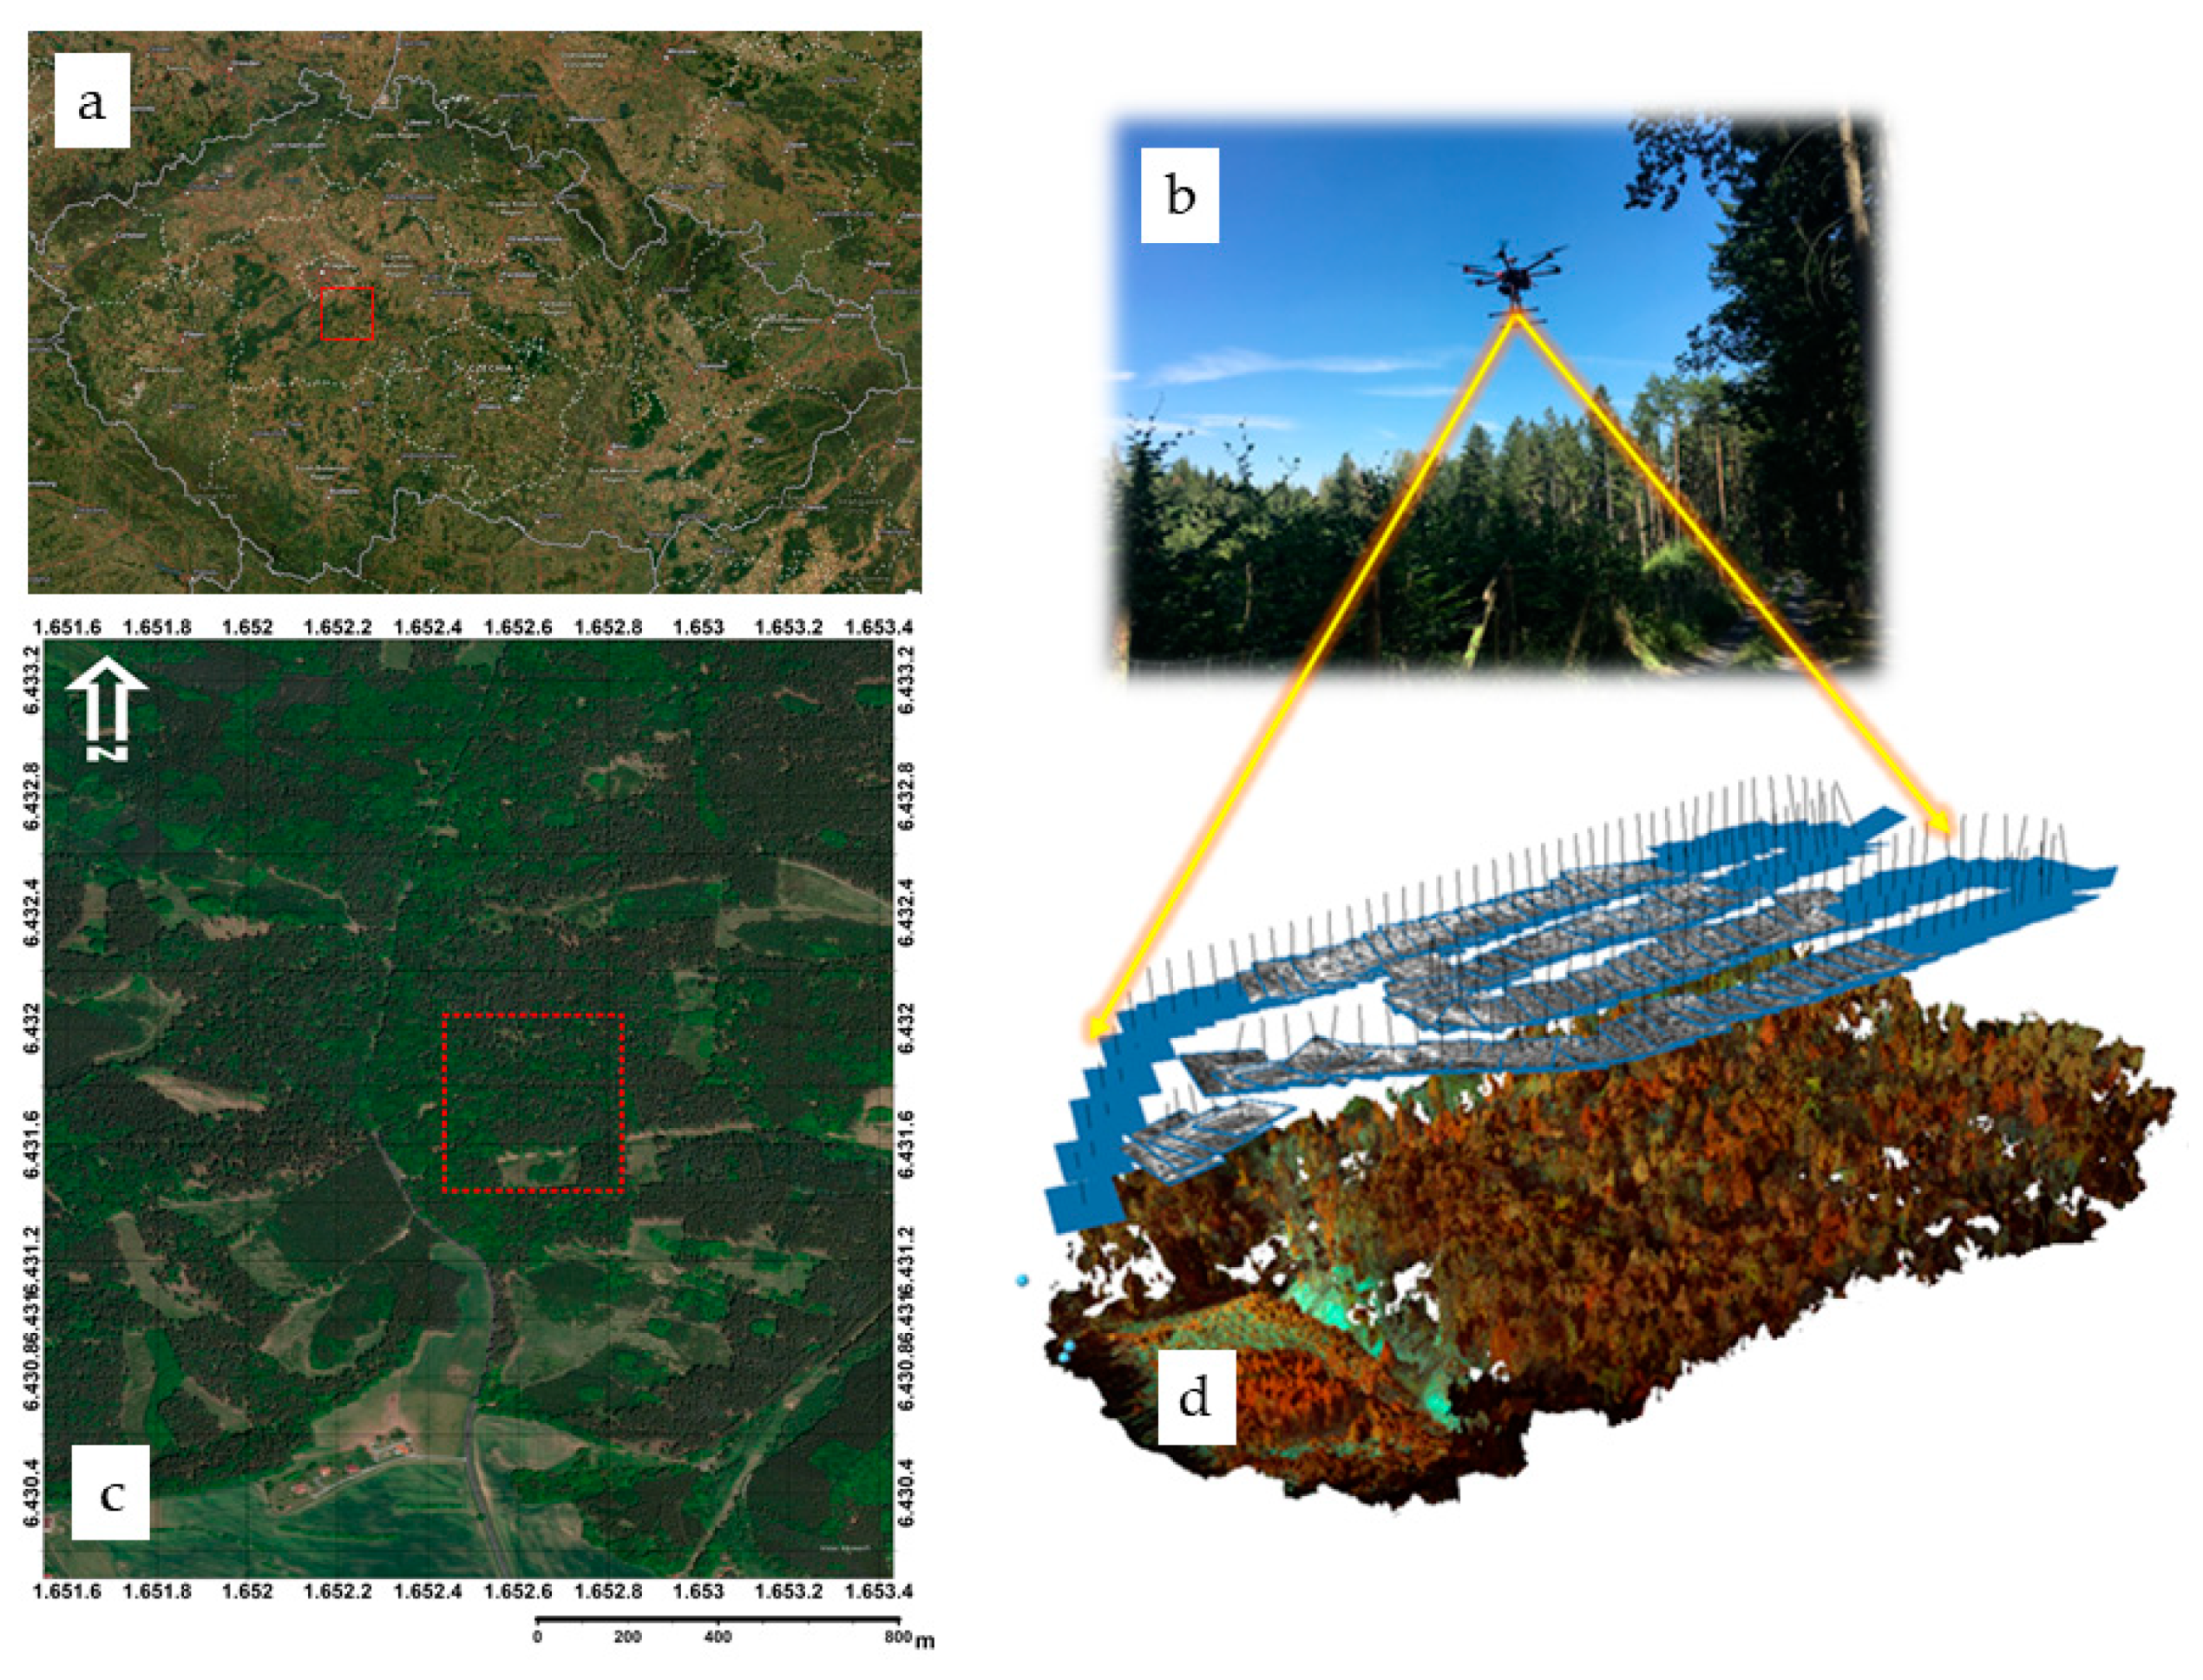 Remote Sensing | Free Full-Text | Tree Species Classification and Health  Status Assessment for a Mixed Broadleaf-Conifer Forest with UAS  Multispectral Imaging | HTML